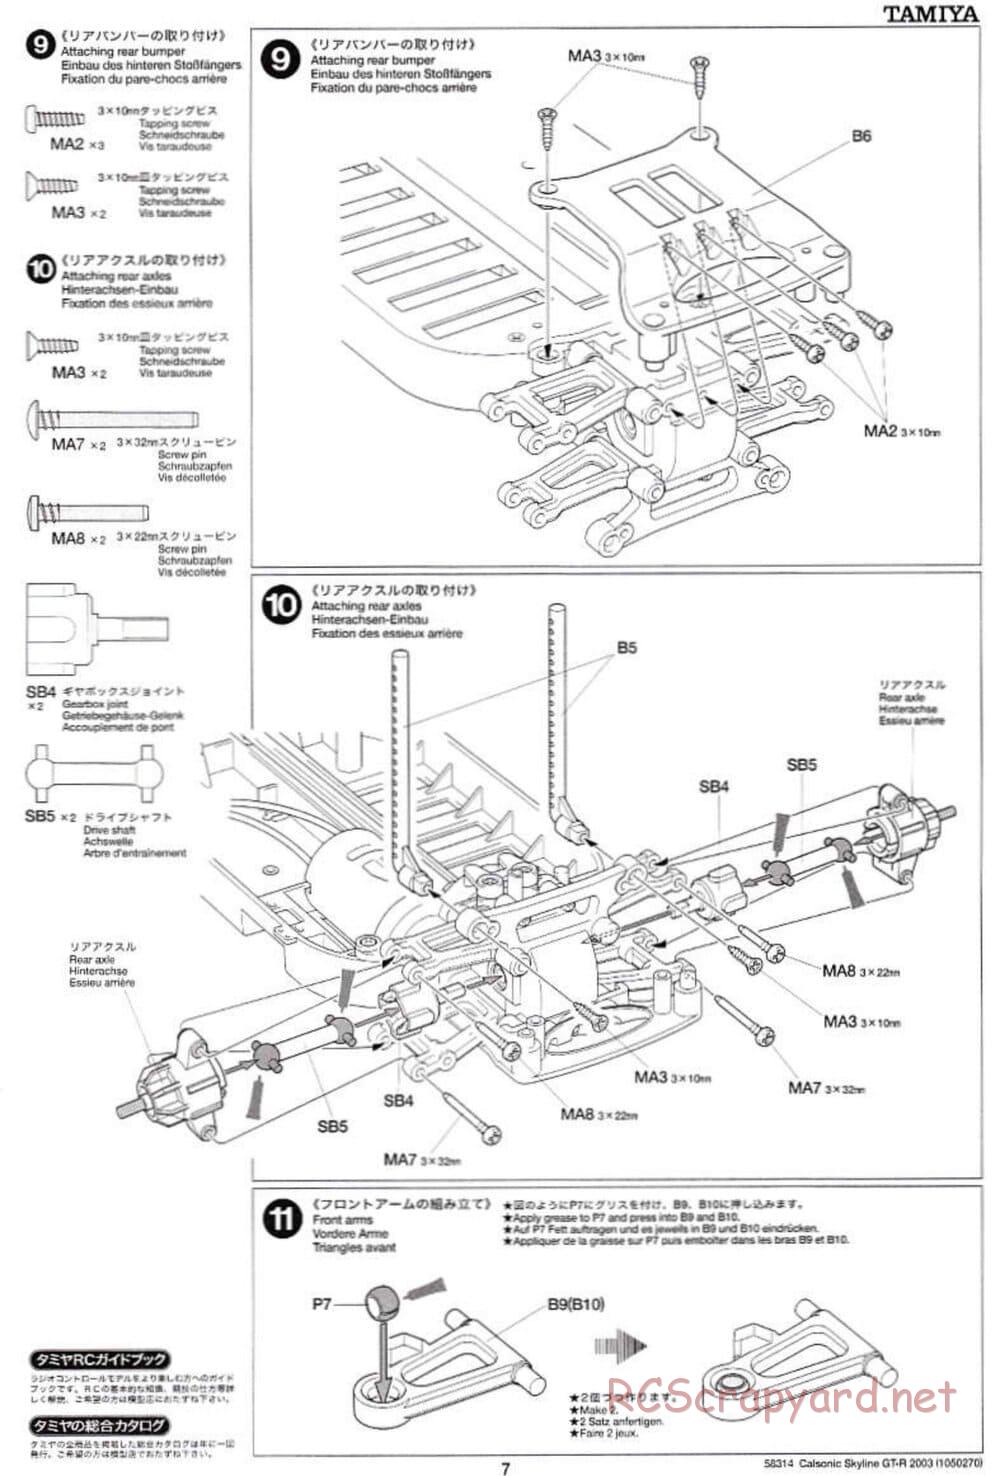 Tamiya - Calsonic Skyline GT-R 2003 - TT-01 Chassis - Manual - Page 7